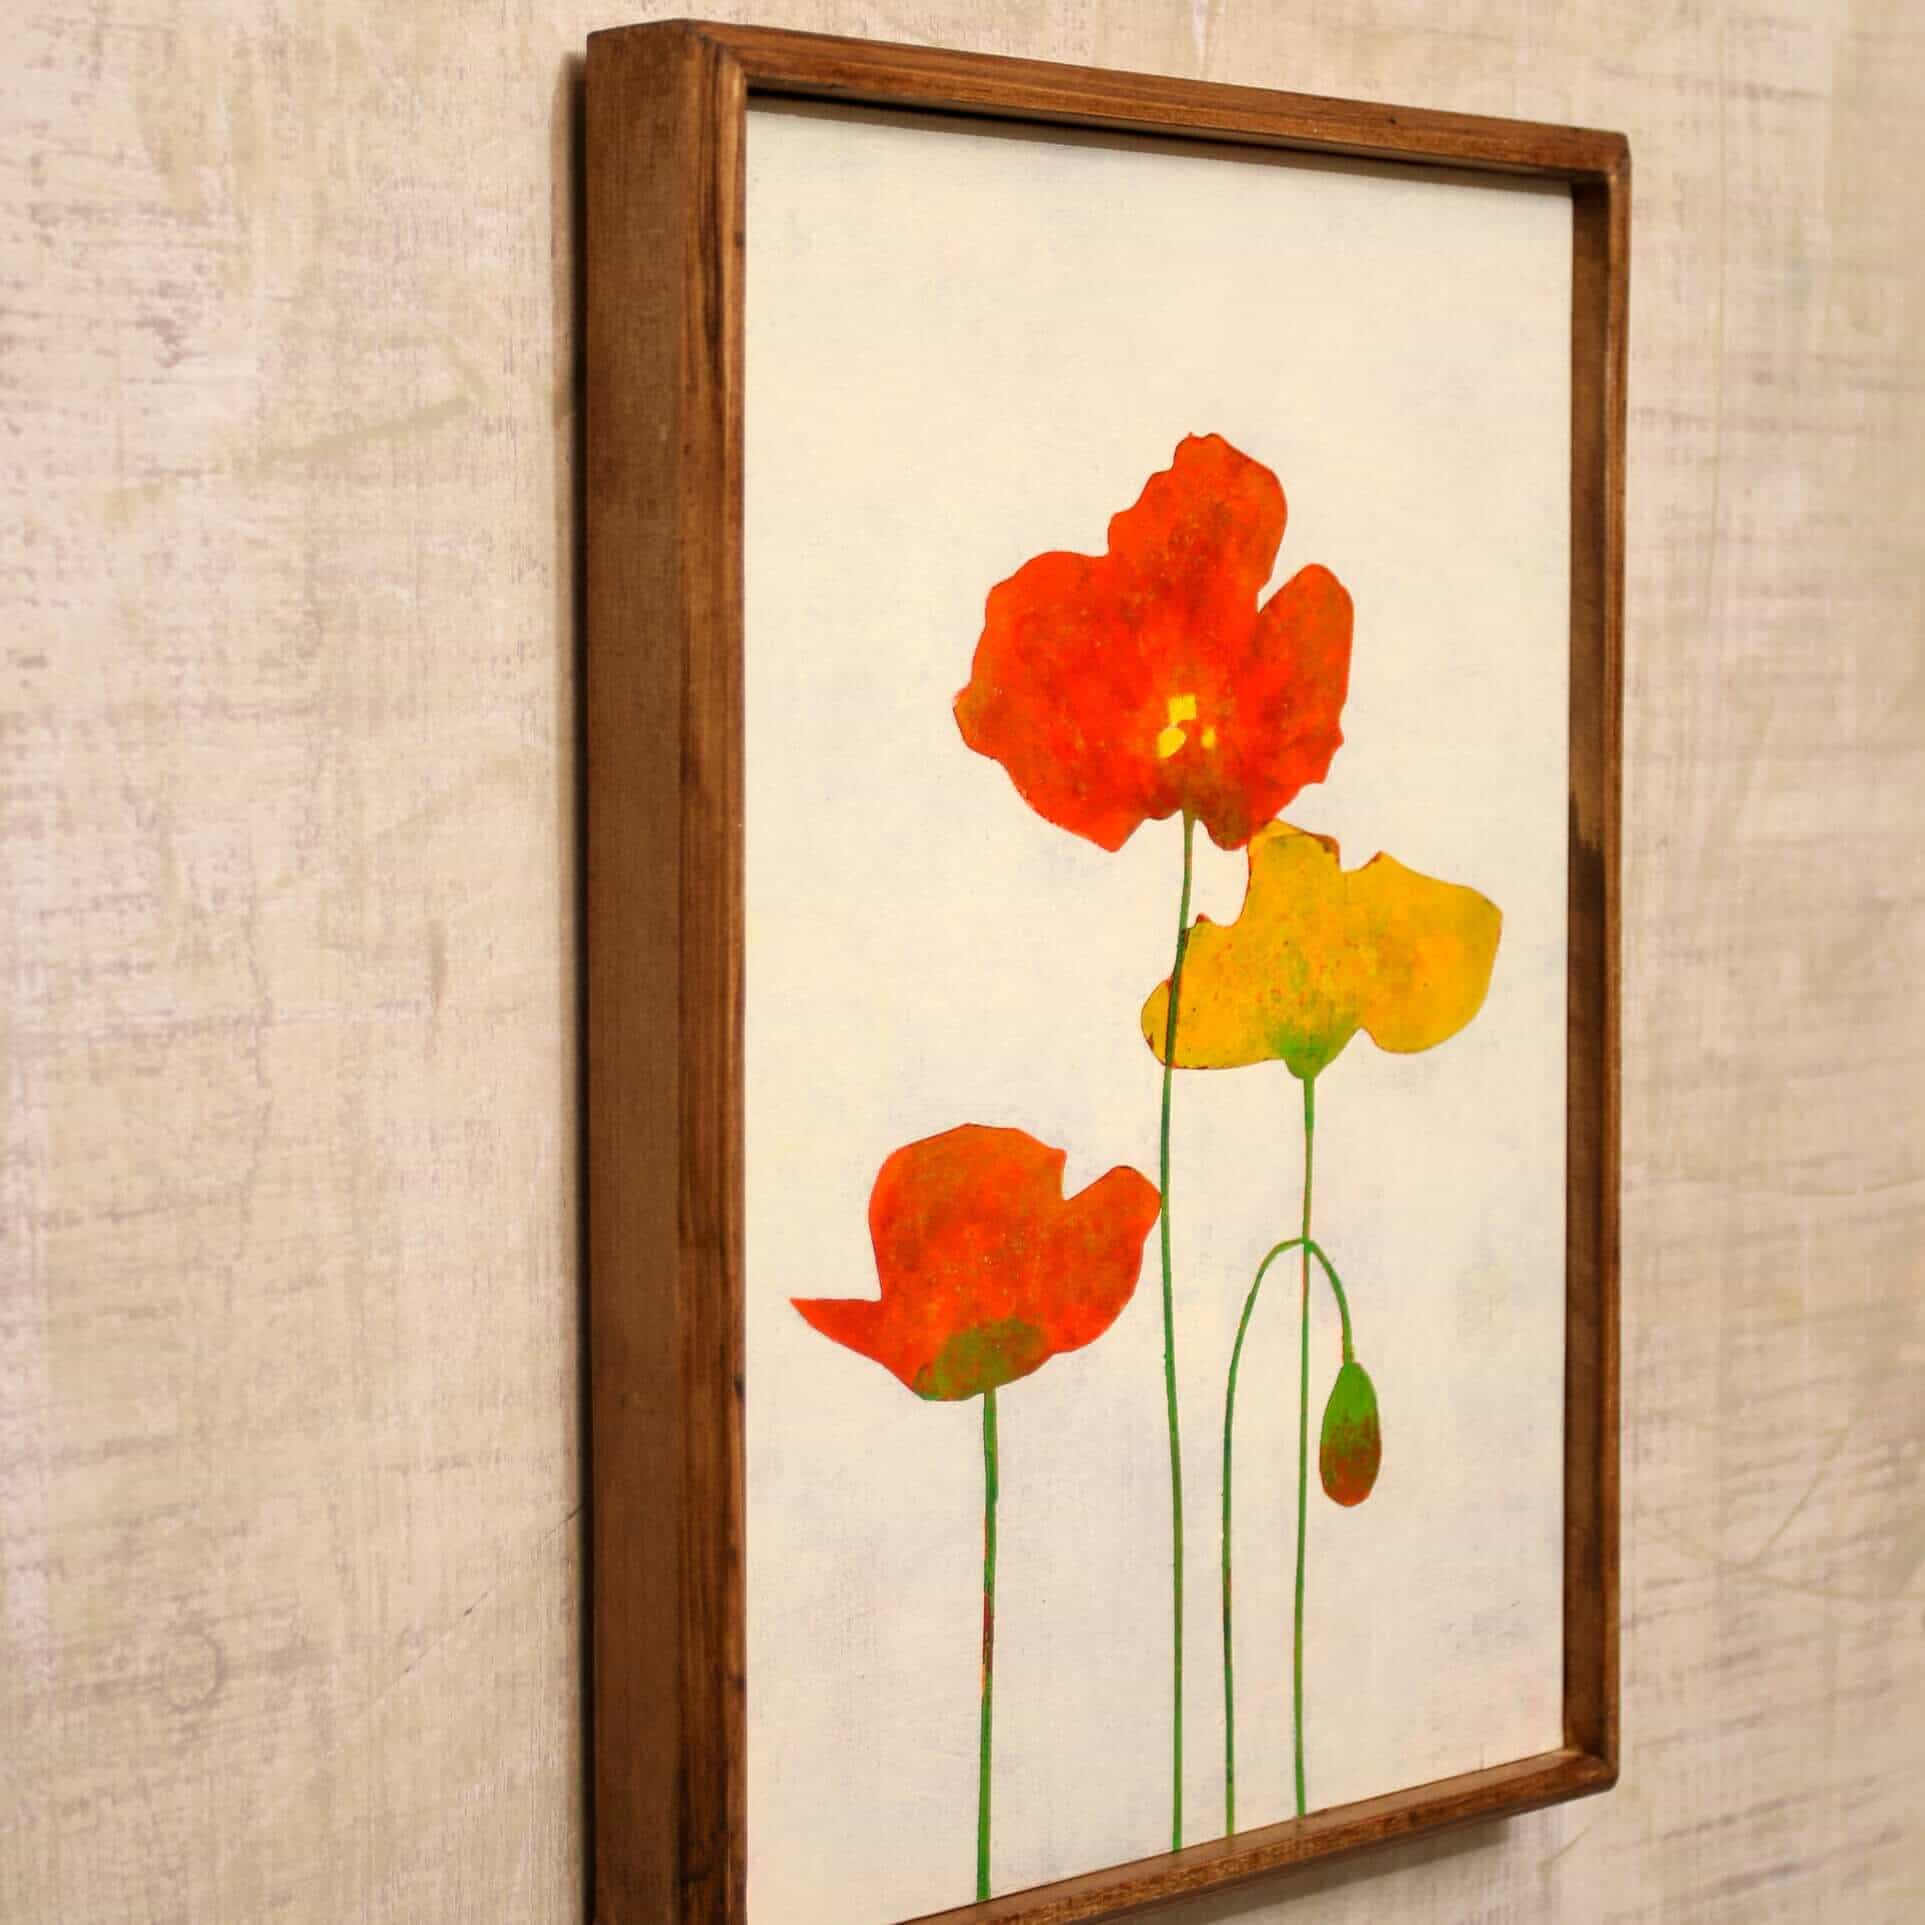 Orange and yellow poppies_A No.186-2